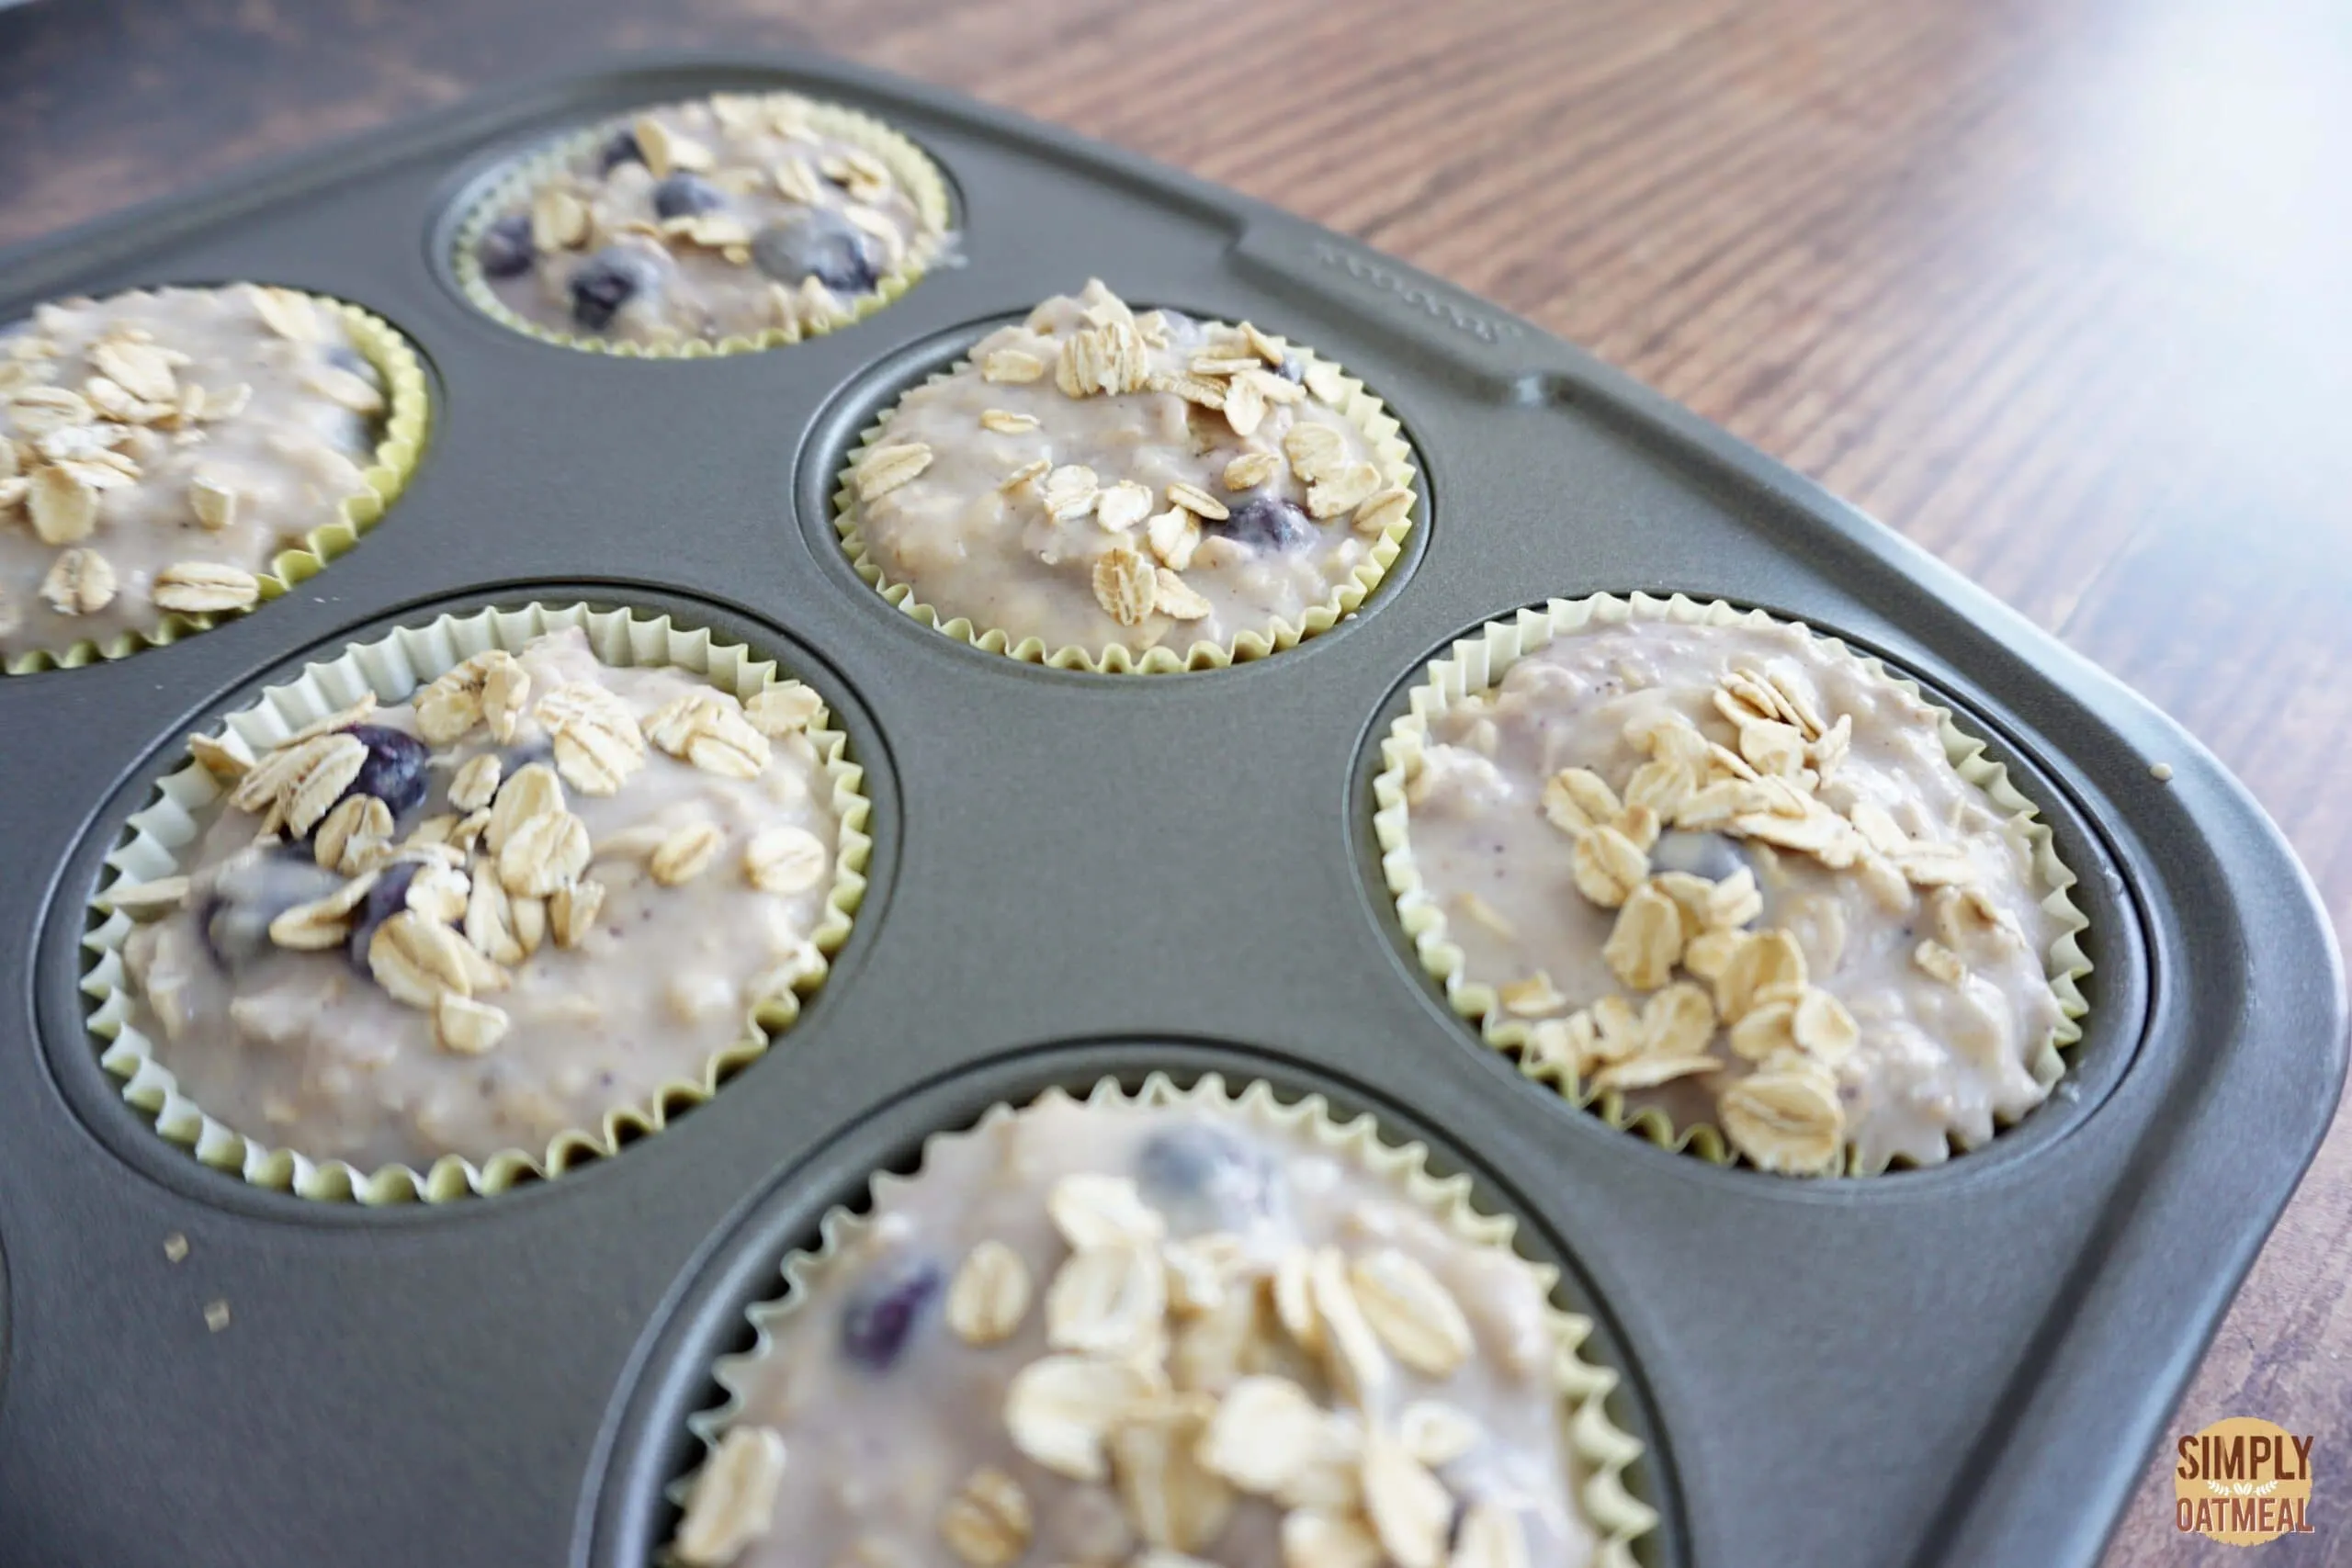 Baked blueberry lemon oatmeal muffins in a muffin pan